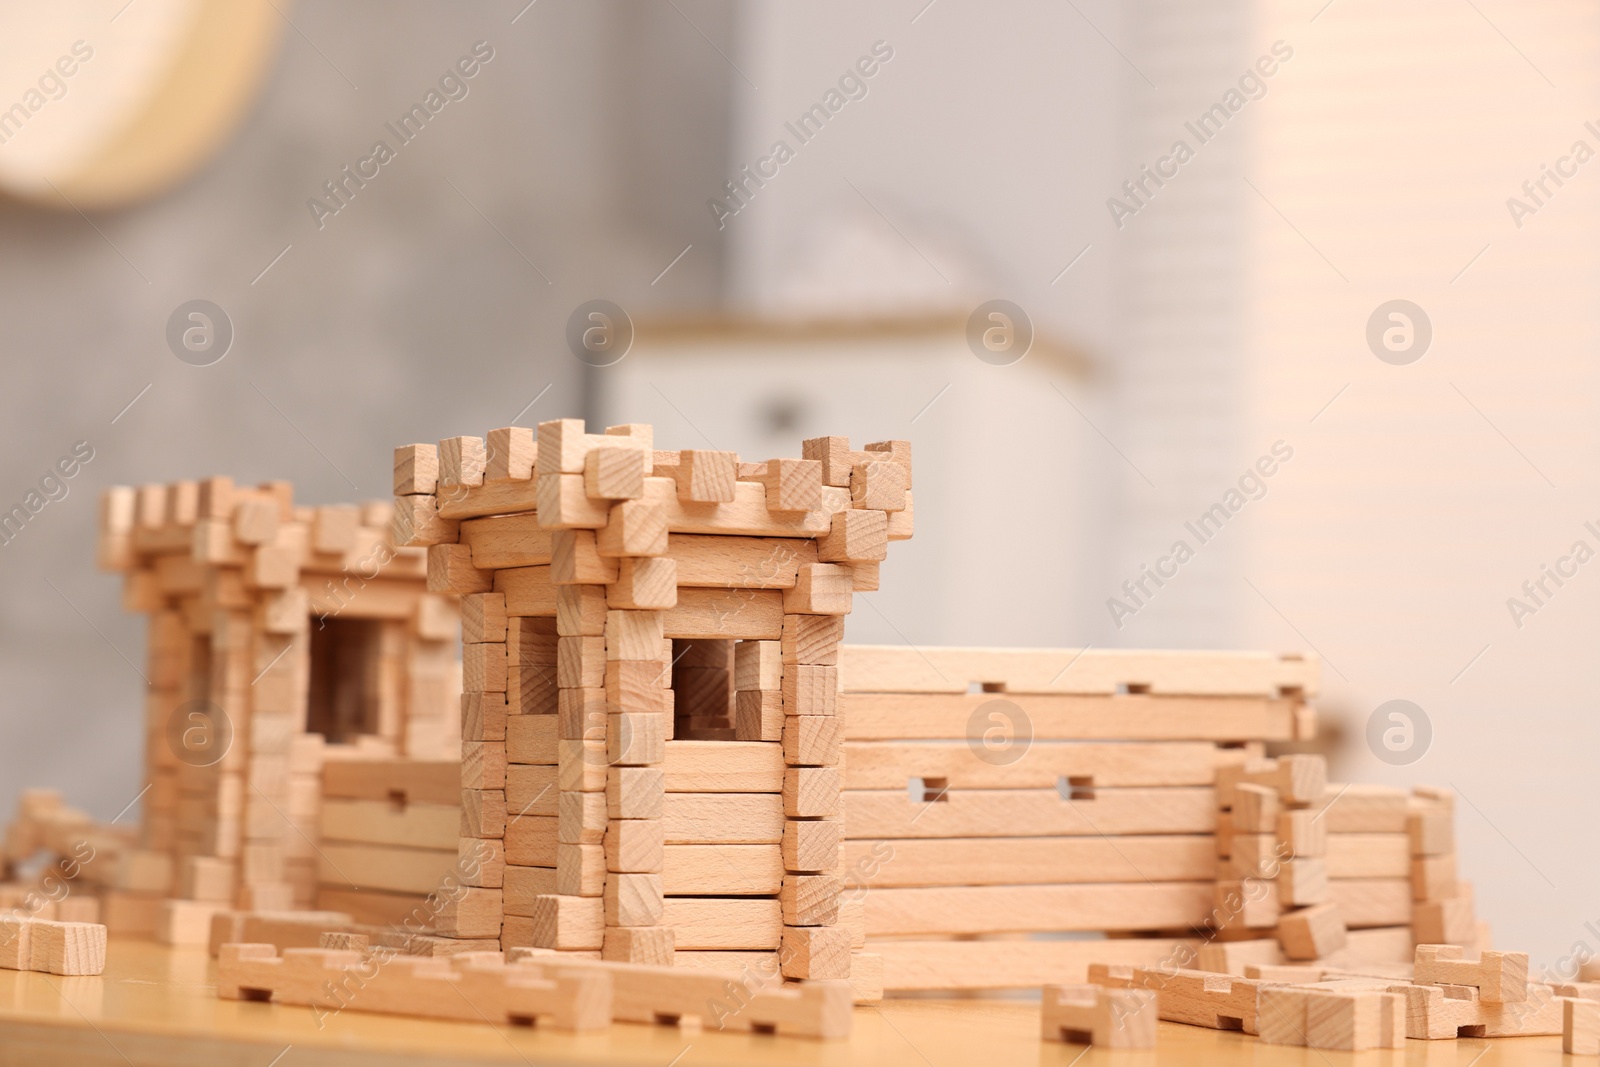 Photo of Wooden construction set on table indoors, space for text. Children's toy